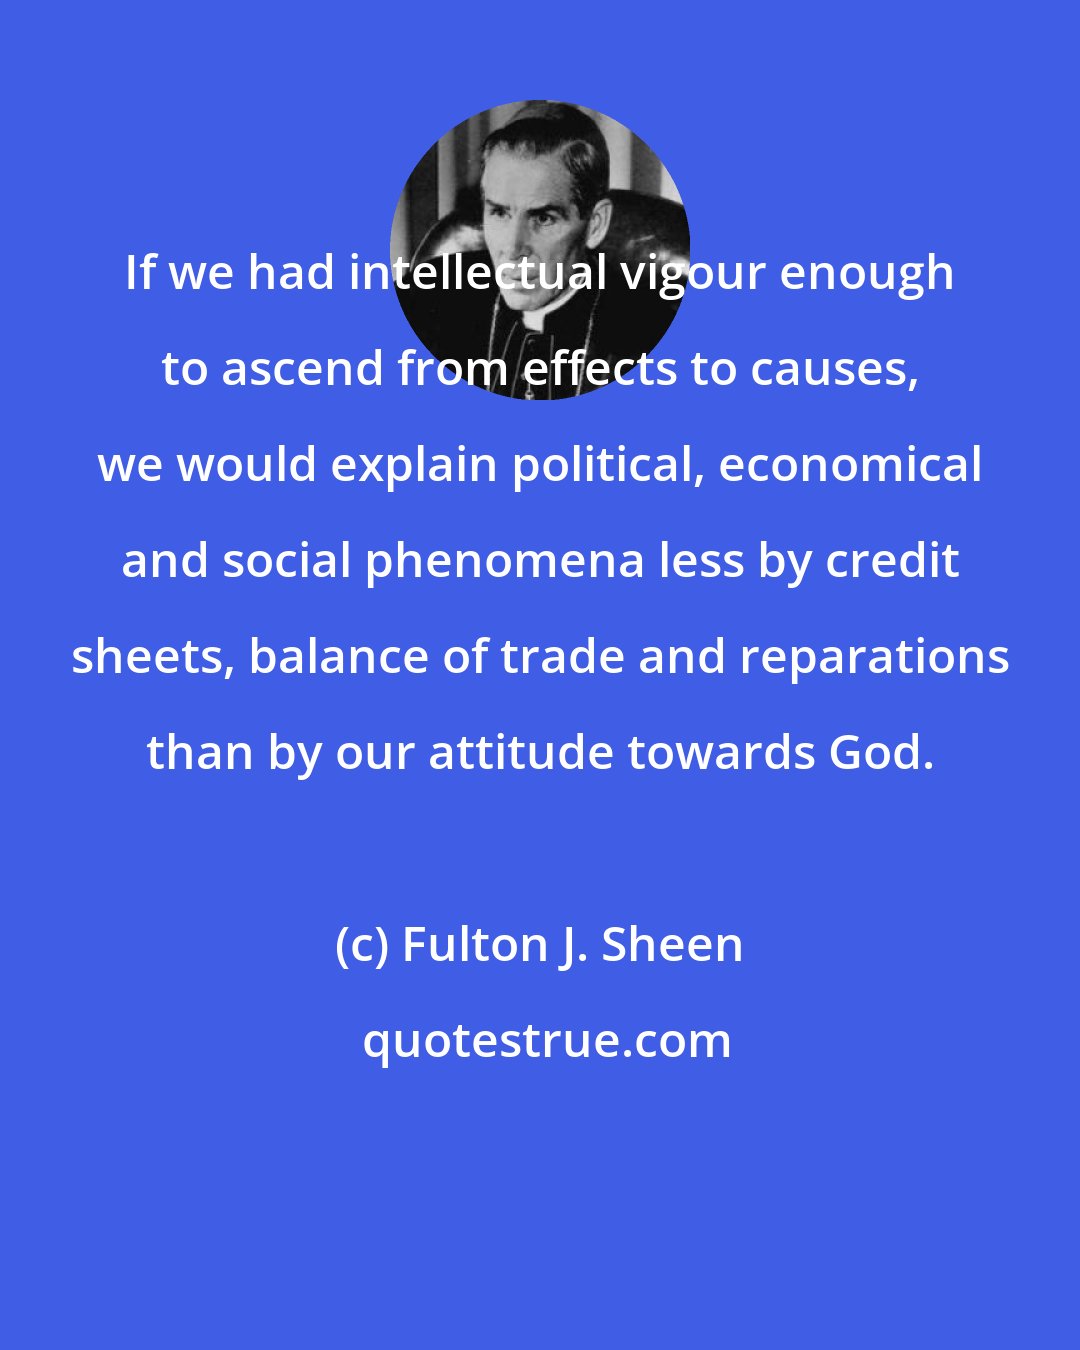 Fulton J. Sheen: If we had intellectual vigour enough to ascend from effects to causes, we would explain political, economical and social phenomena less by credit sheets, balance of trade and reparations than by our attitude towards God.